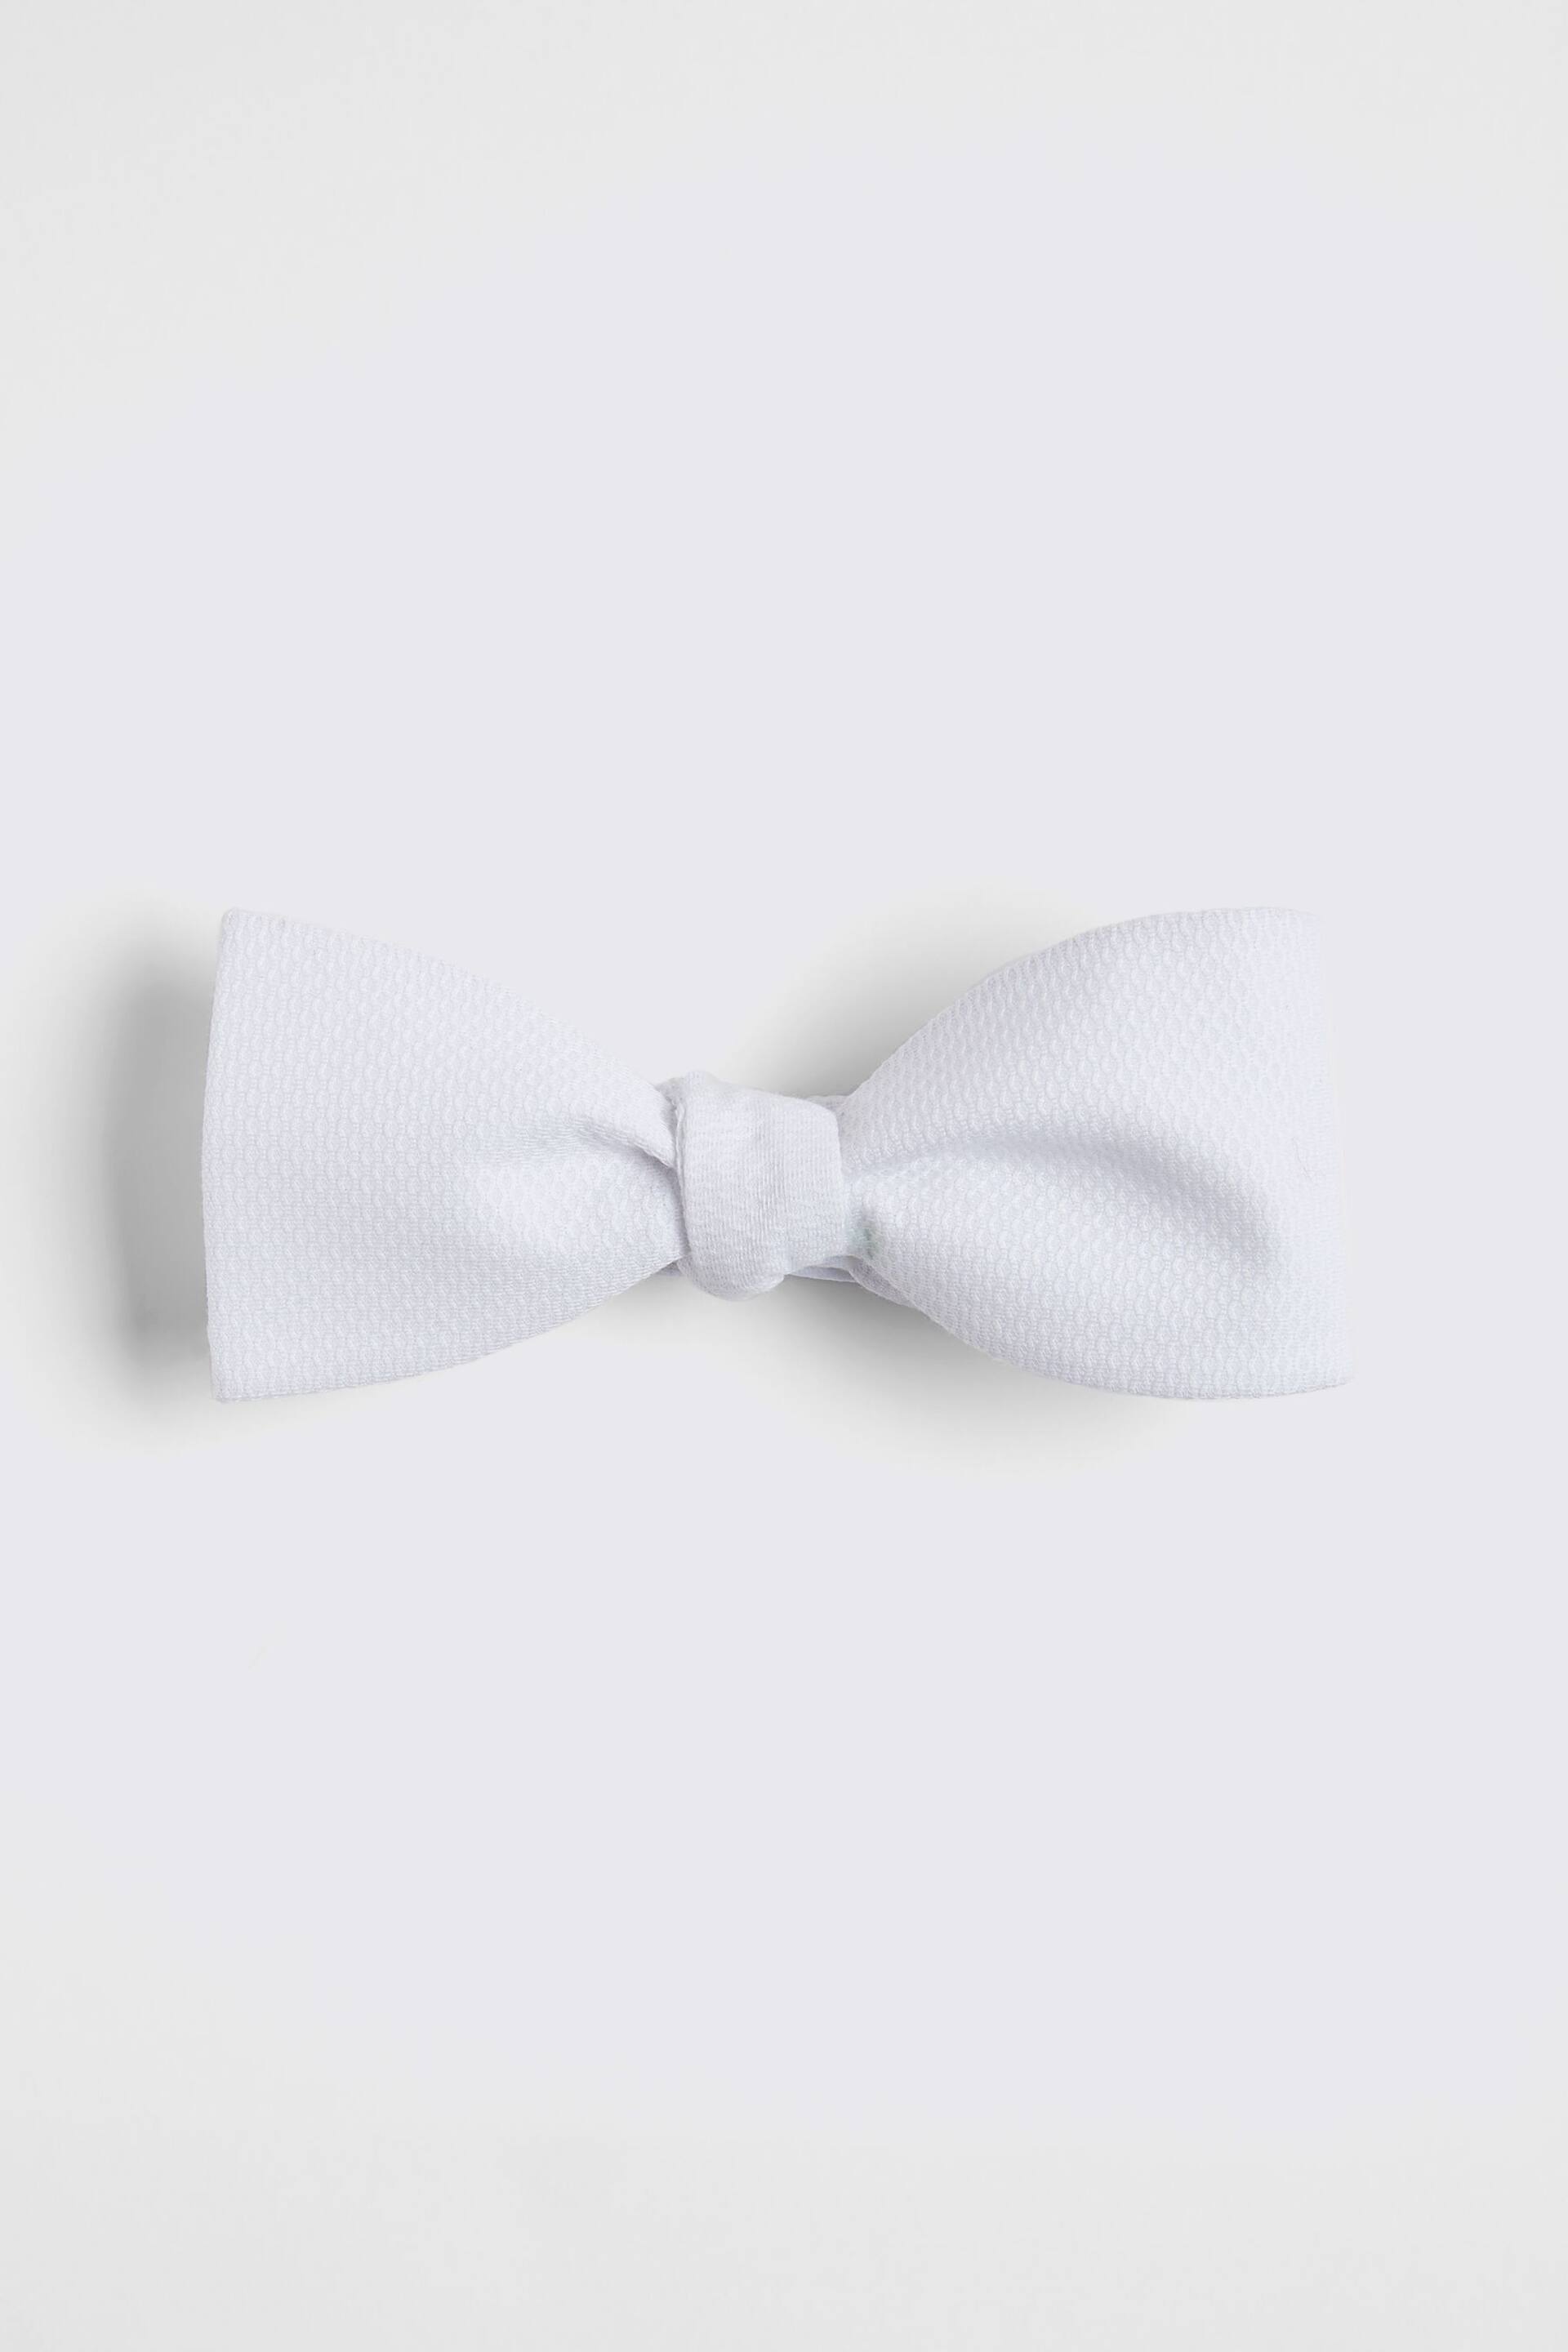 MOSS Marcella Self White Bow Tie - Image 1 of 2